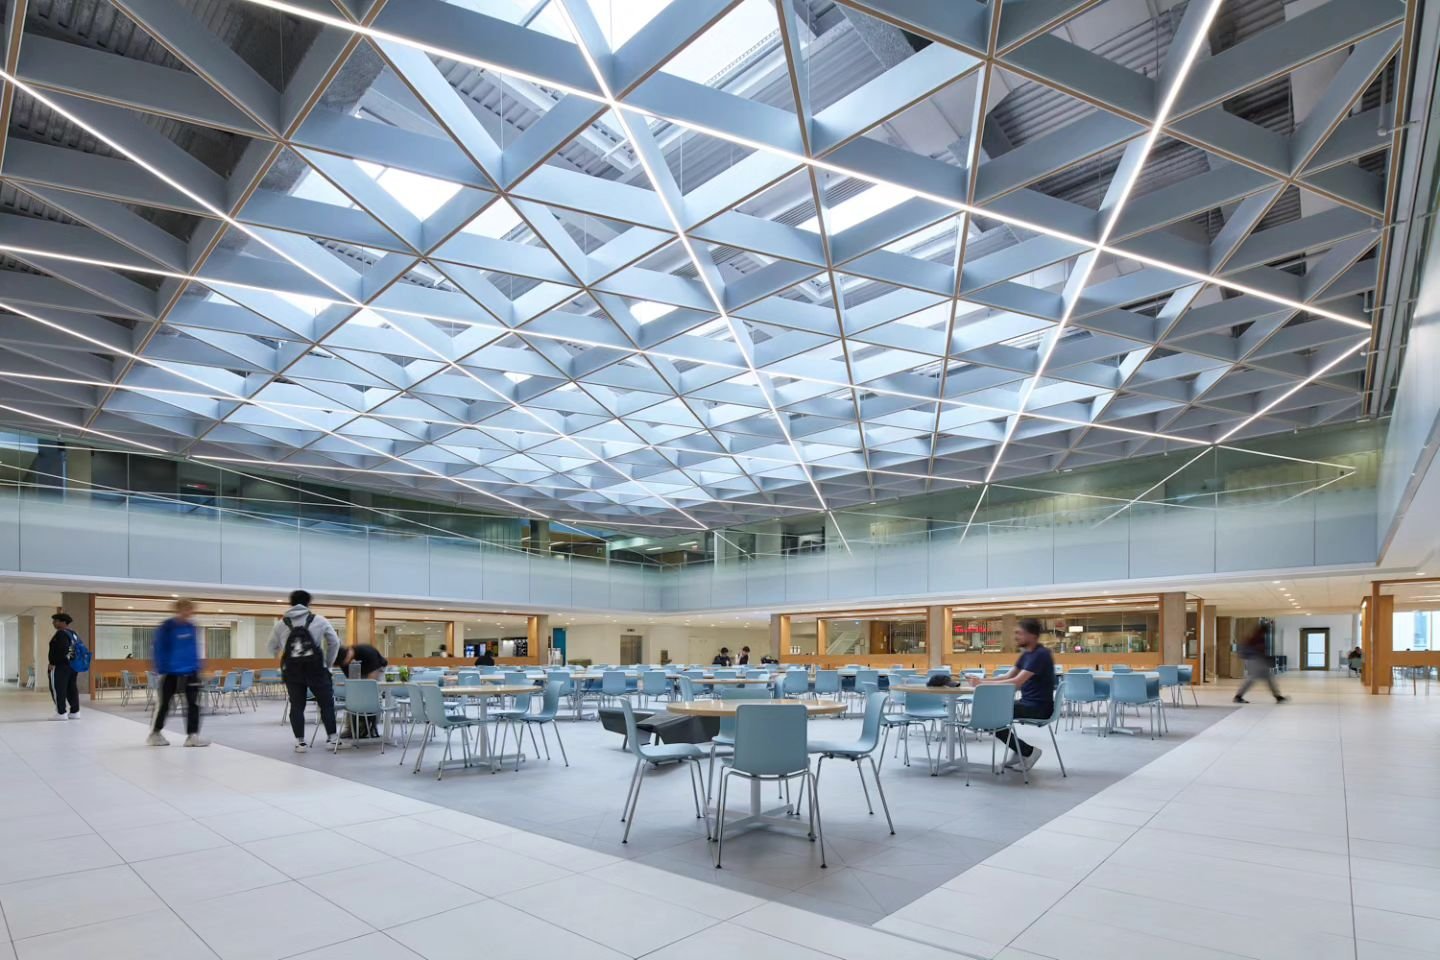 The UTM Meeting Place project included a complete renovation of the student food court, gathering spaces, meeting space, and outdoor landscape area.&nbsp; The ALULA Lighting Design team worked closely with the Architectural and Landscape Architect te